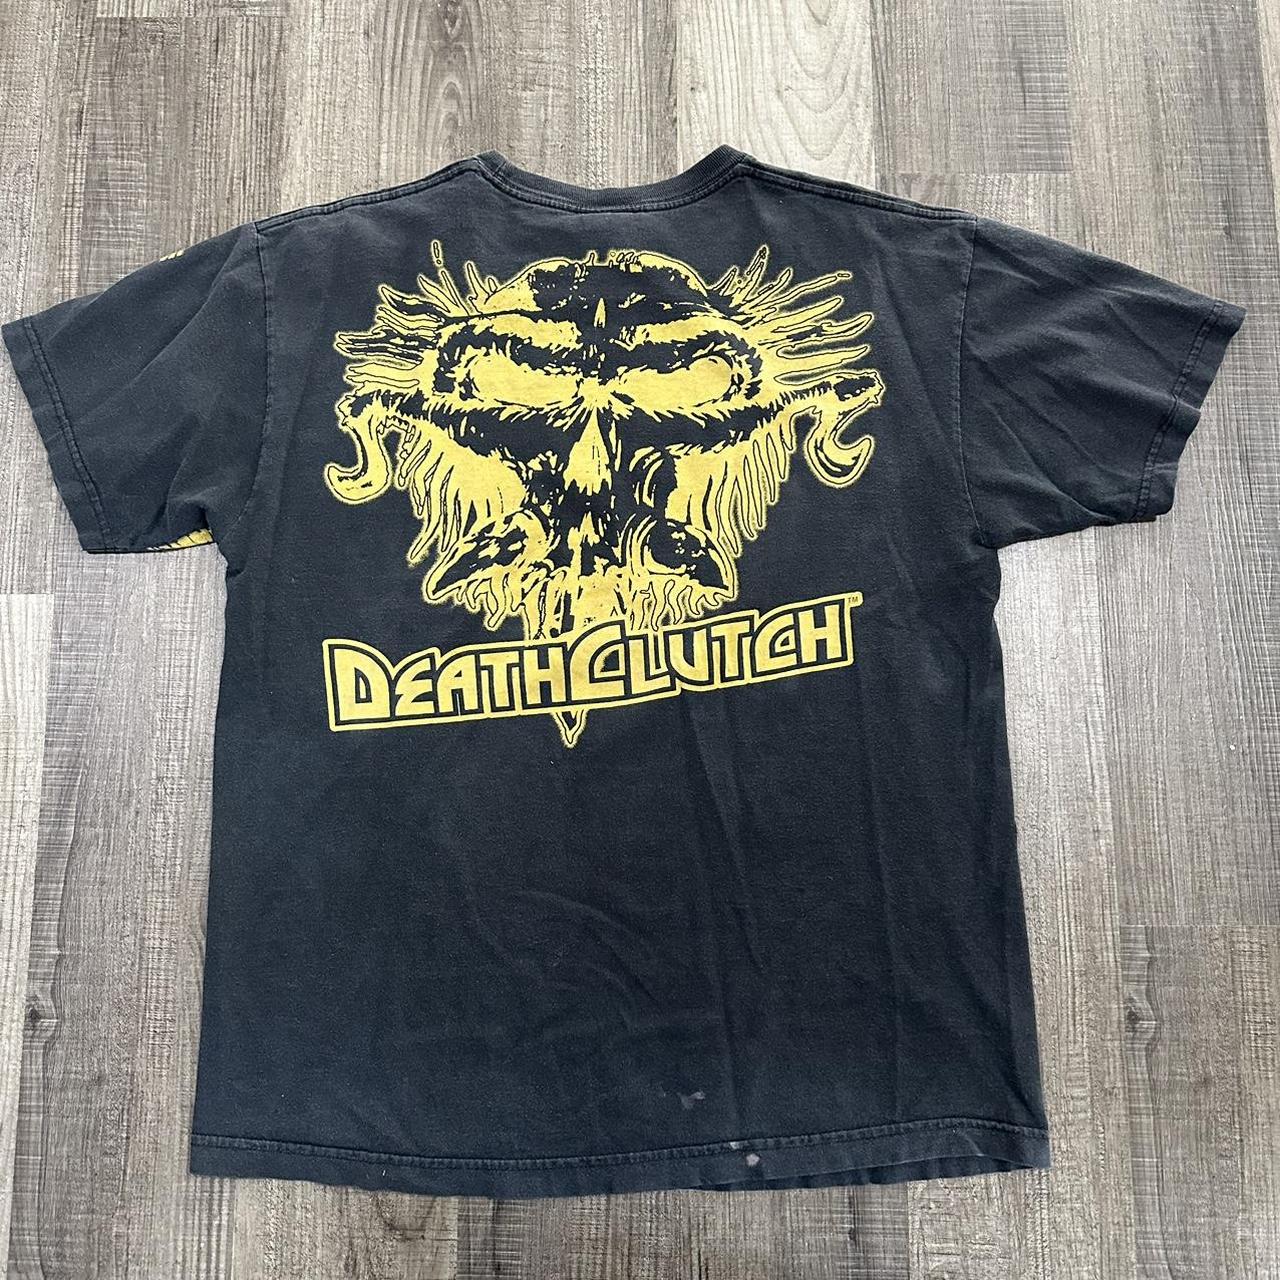 Affliction Men's Black and Yellow T-shirt (2)